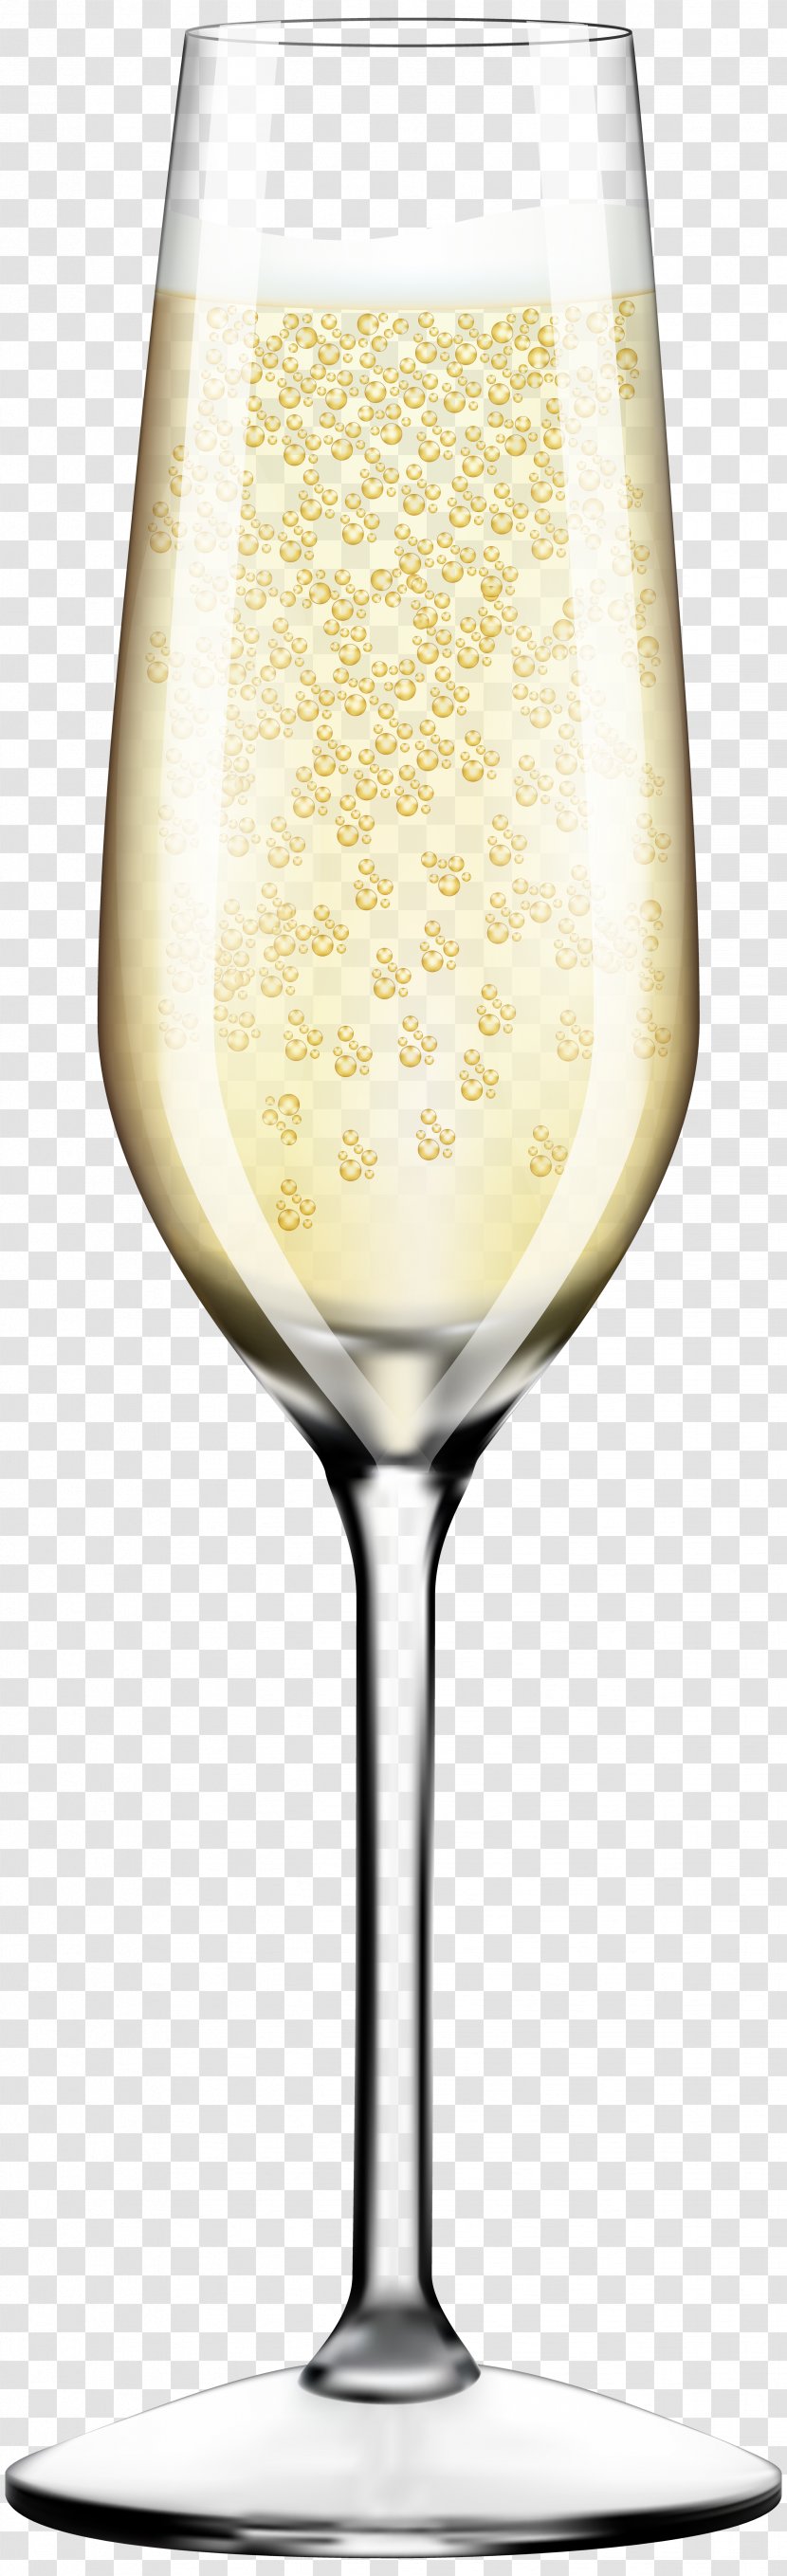 White Wine Champagne Cocktail Beer - Glass - Clip Art Image Transparent PNG